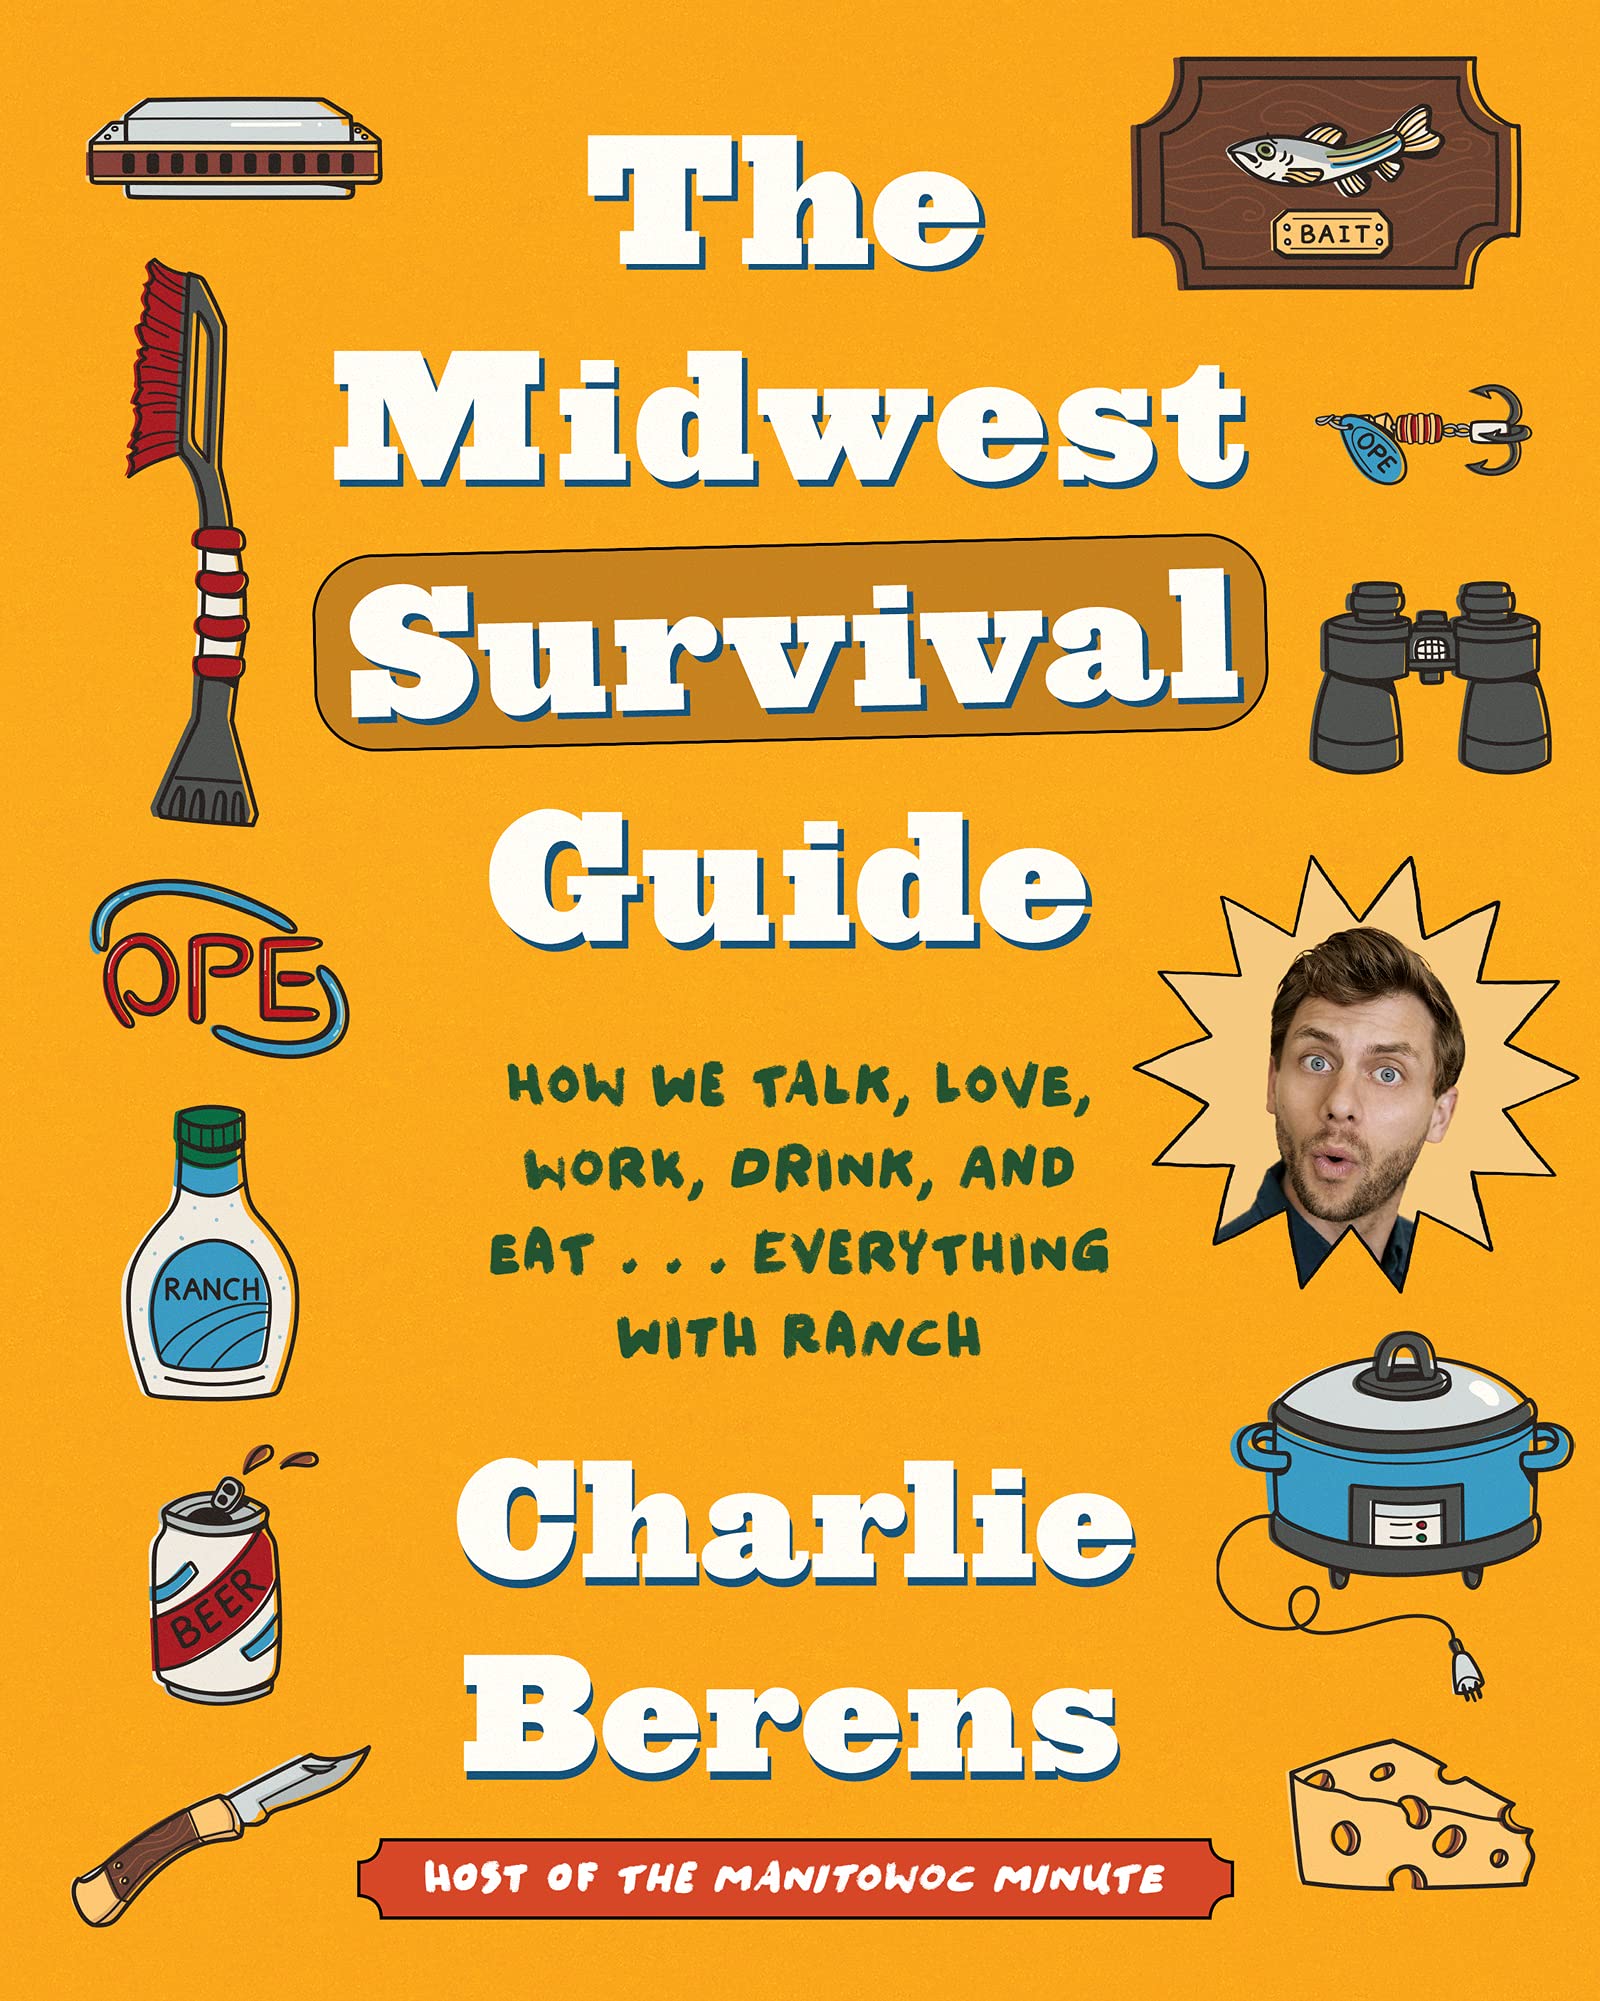 Virtual event with Charlie Berens/The Midwest Survival Guide